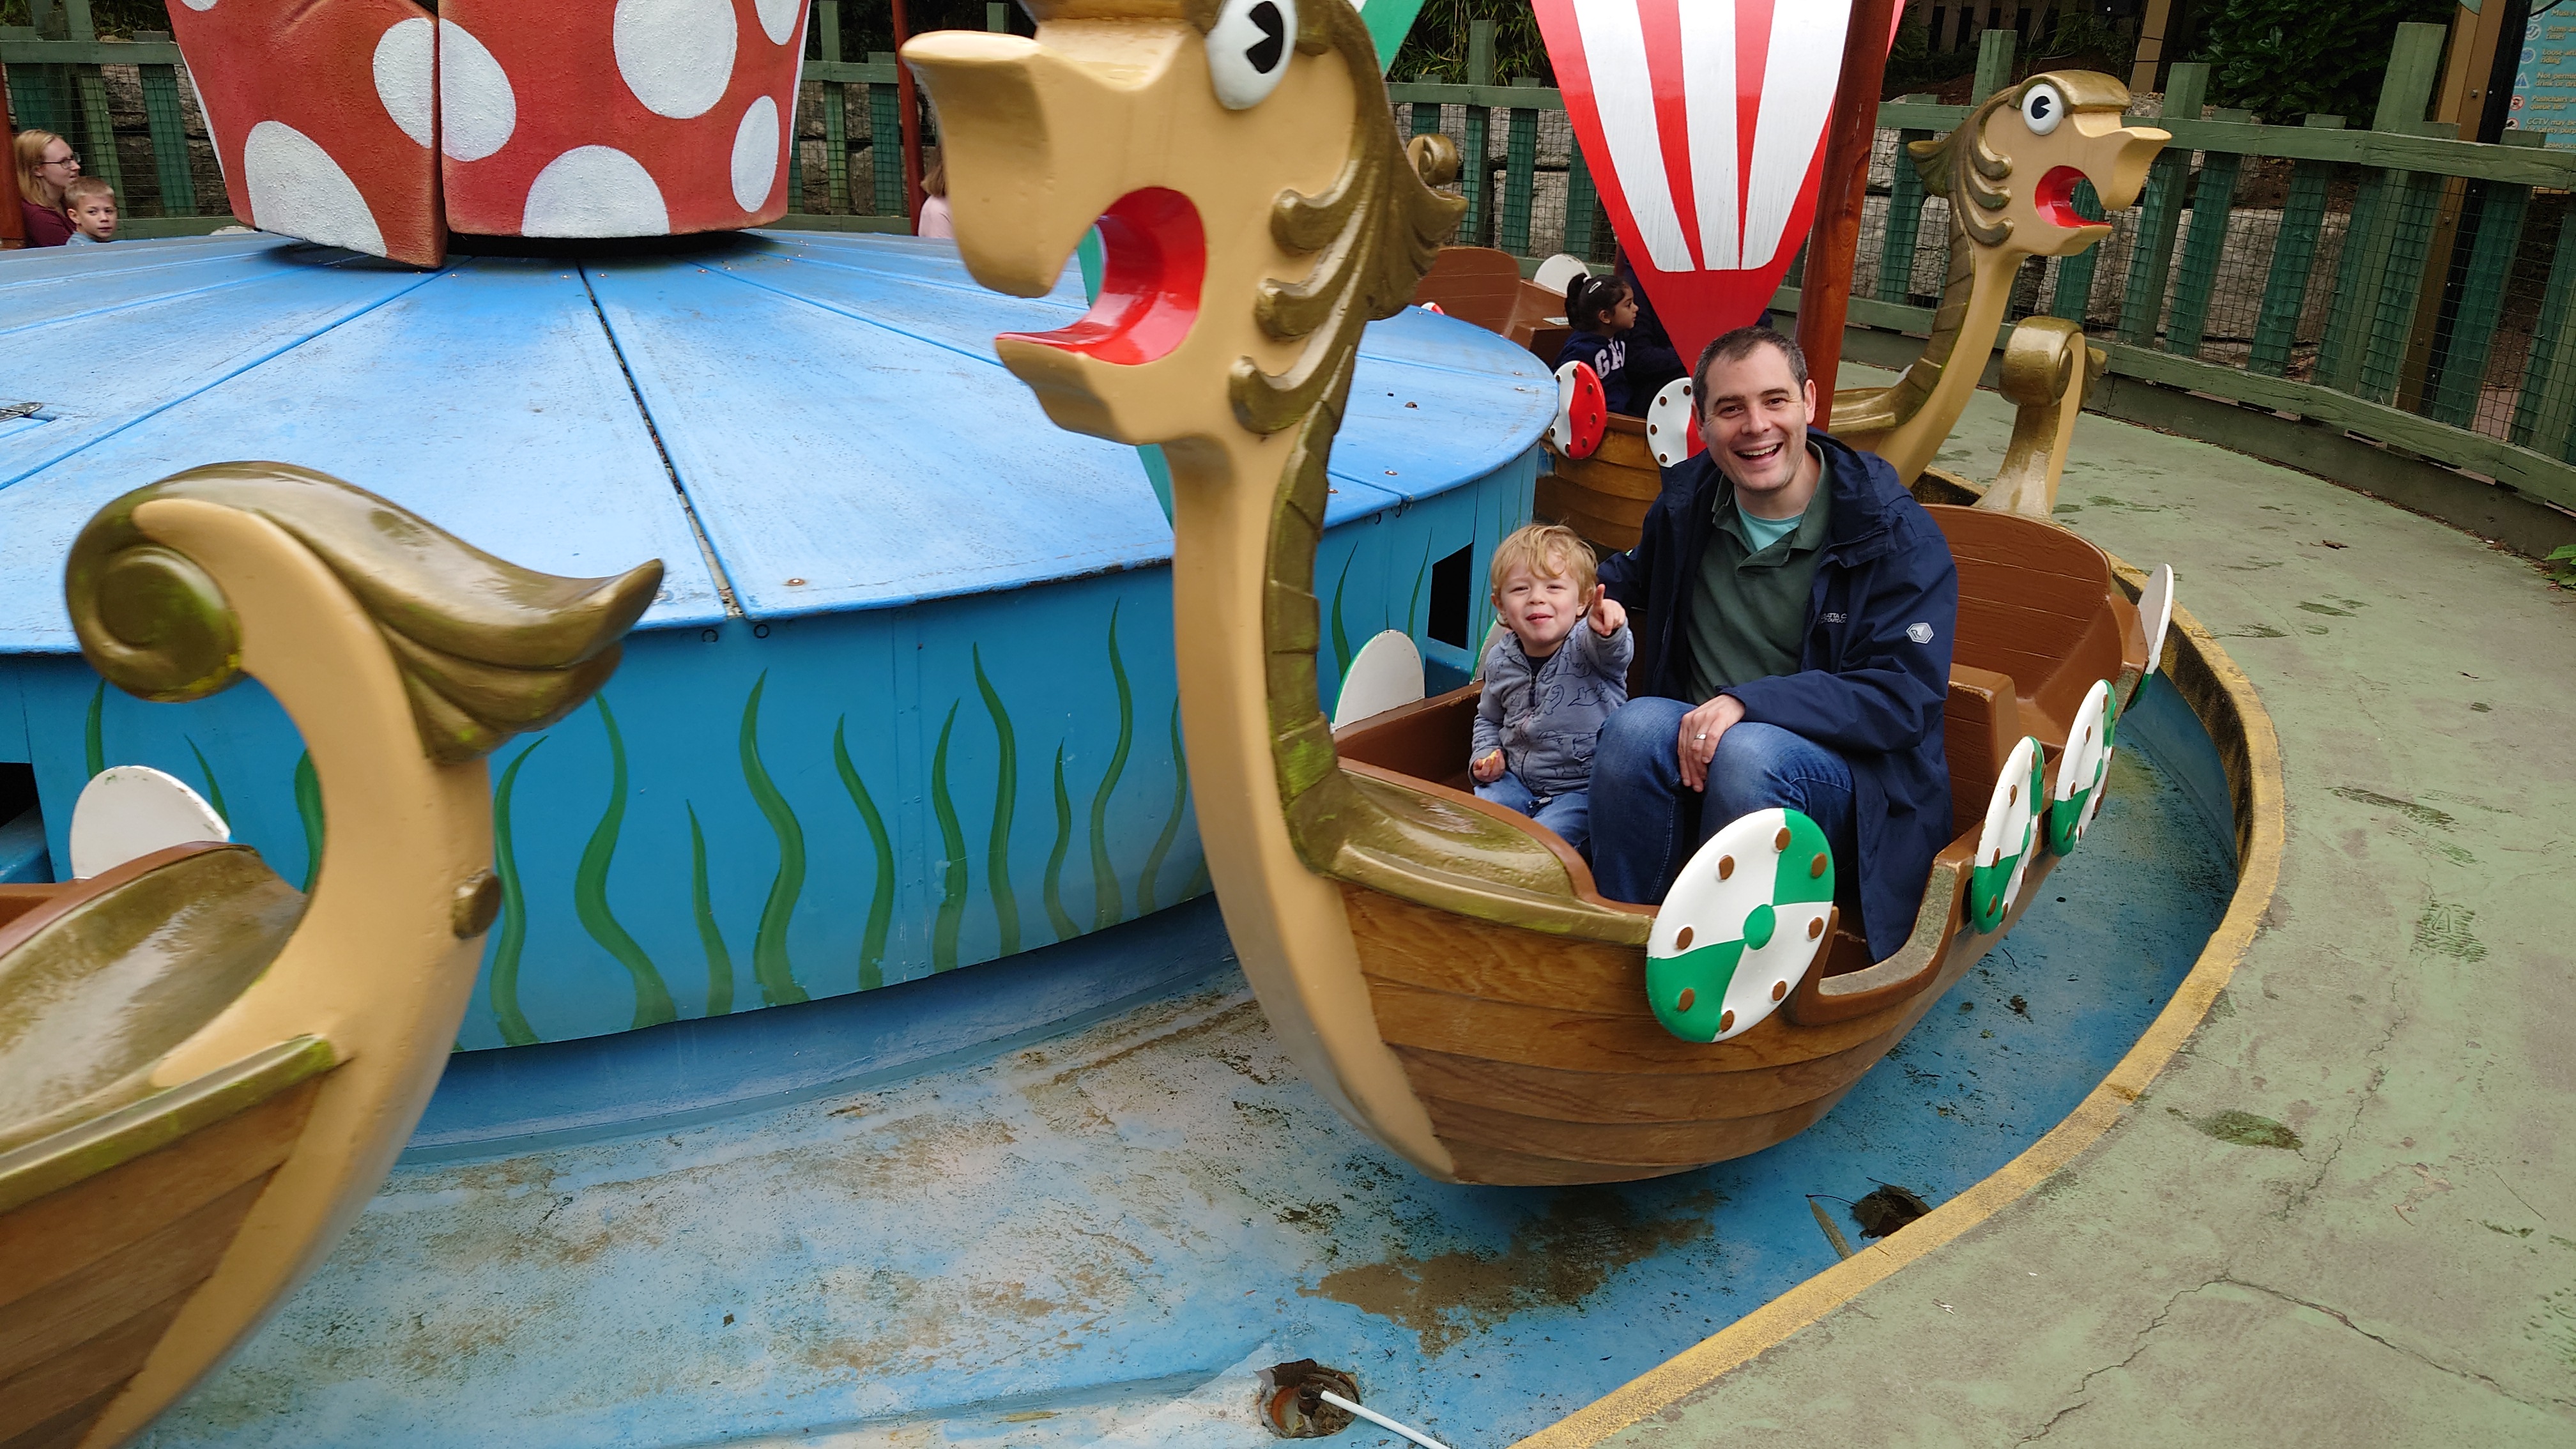 Jonathon Speed introduces his son Monty (Montague), 4, to the Chessington World of Adventures theme park in the UK. 